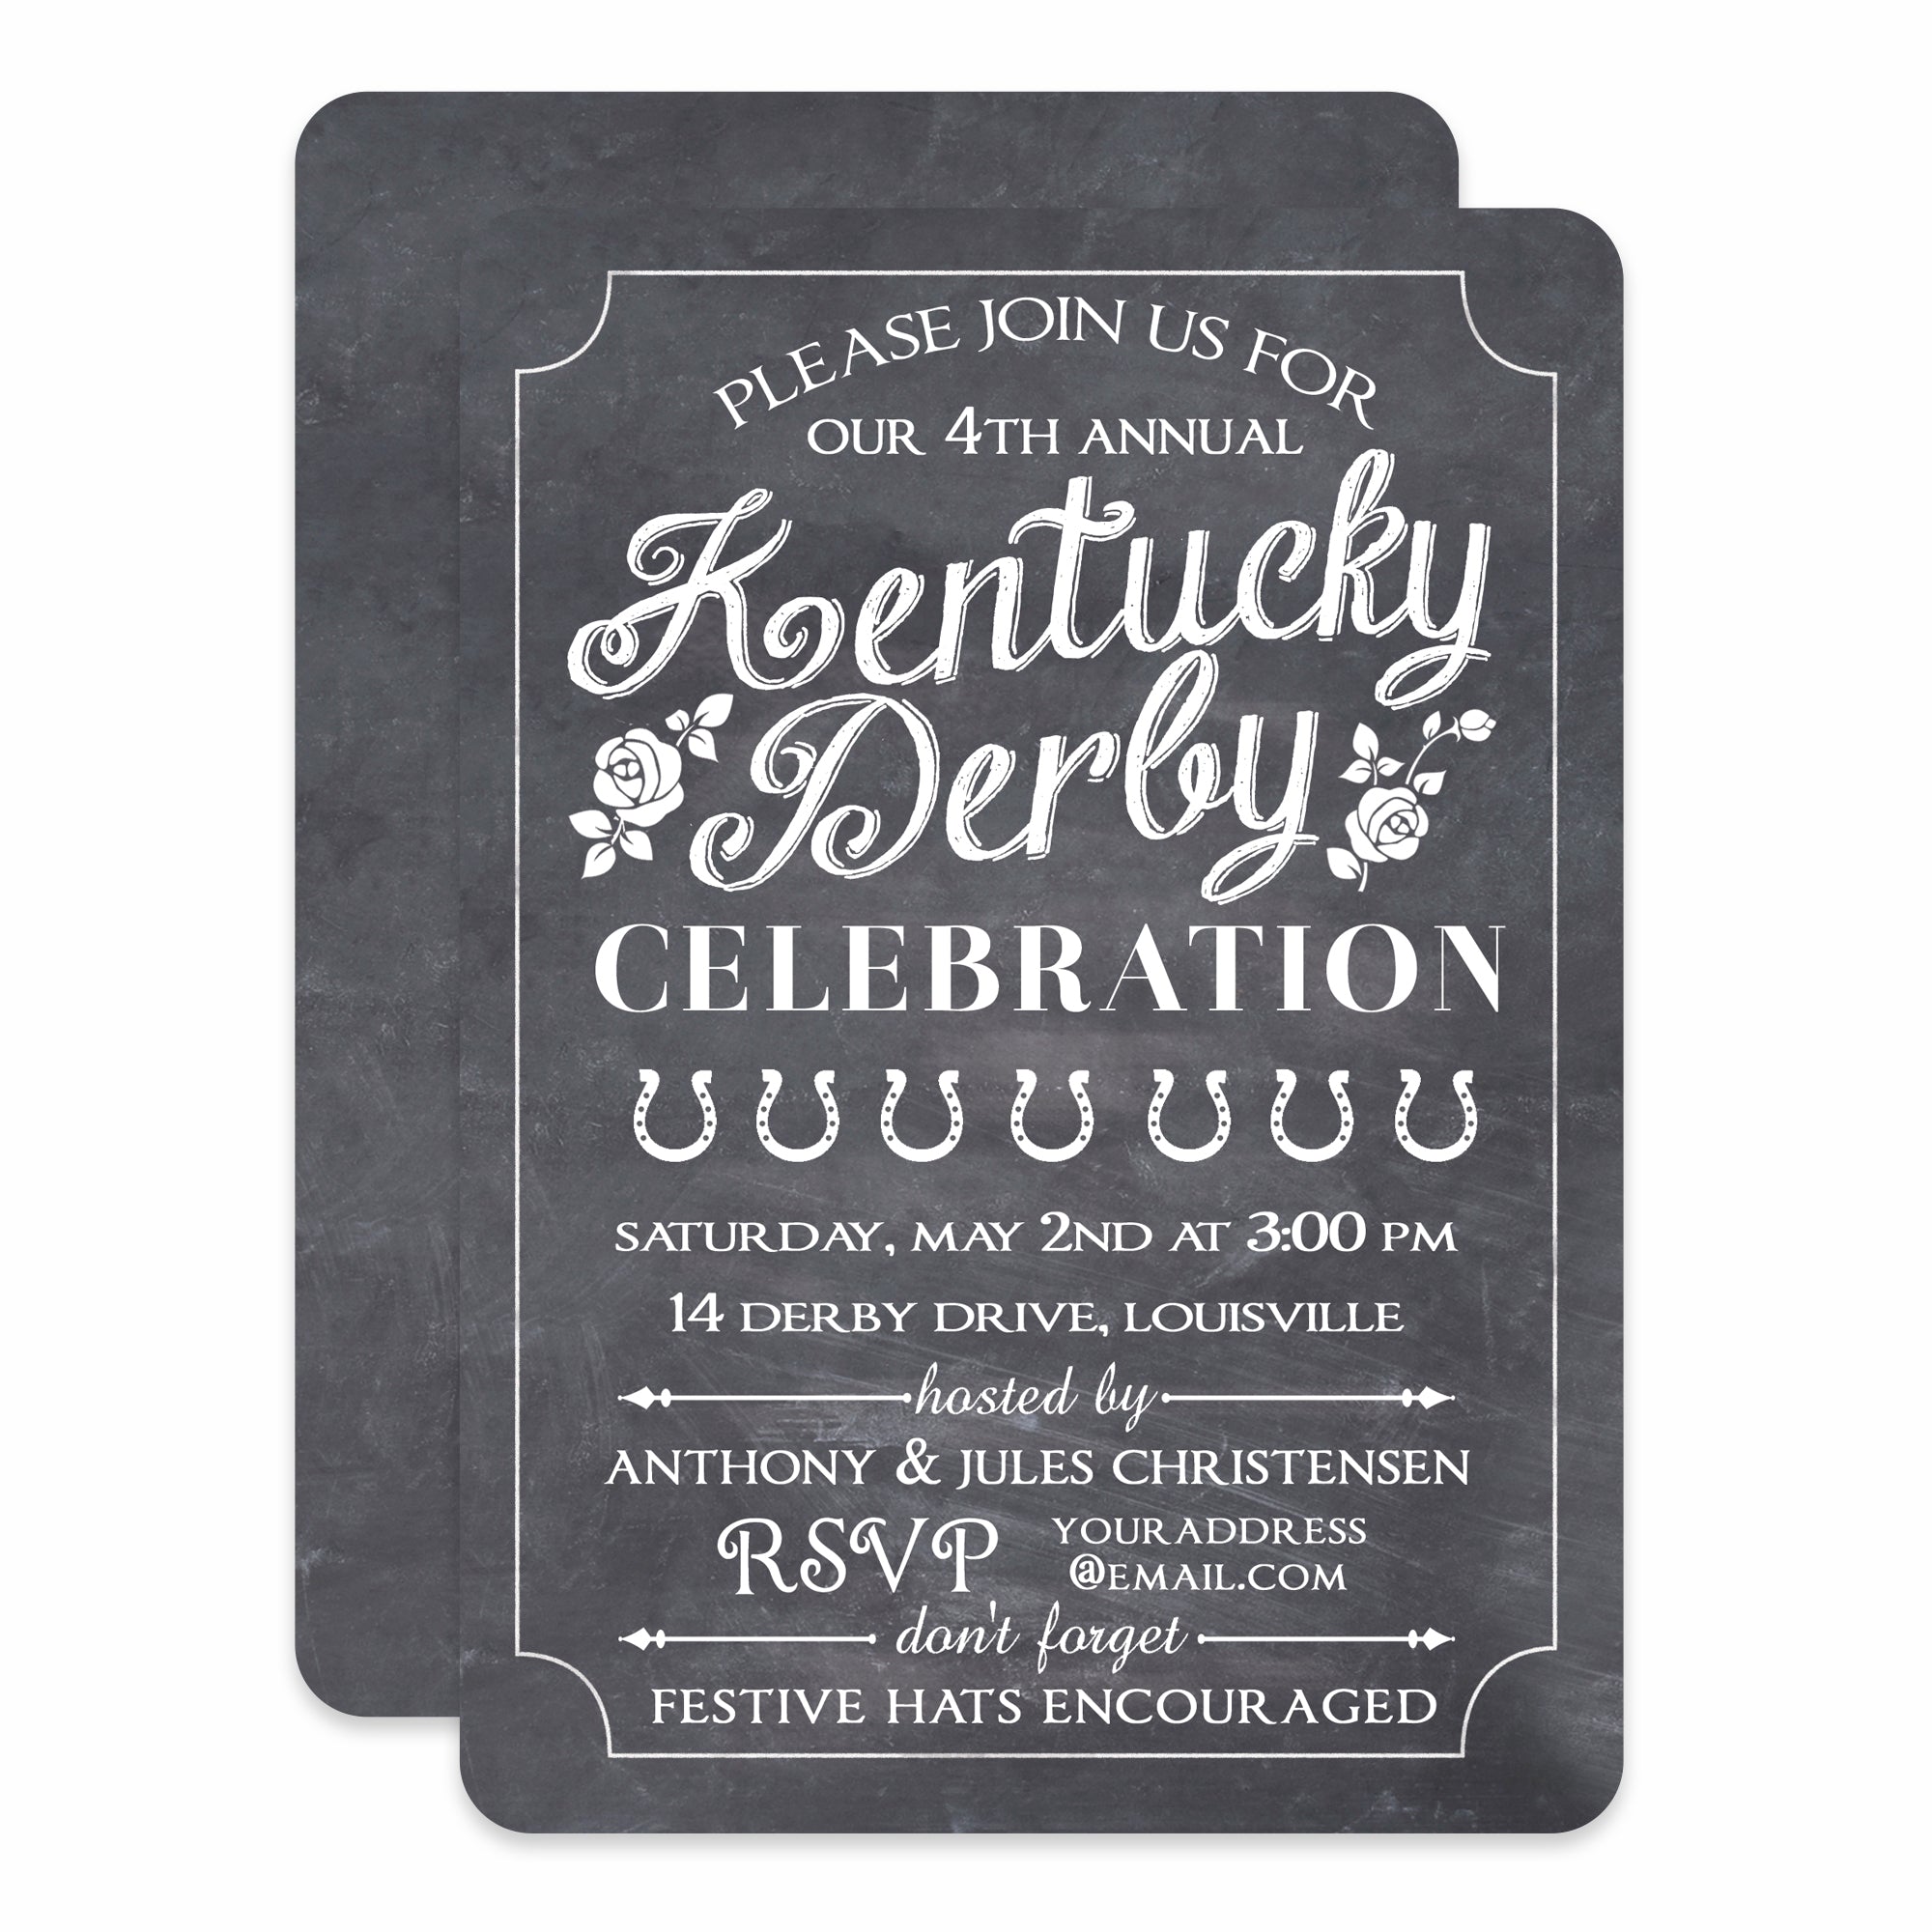 Kentucky Derby Invitation, Chalkboard Style Invitation with roses and horse shoes, printed on ultra heavy weight cardstock, Pipsy.com